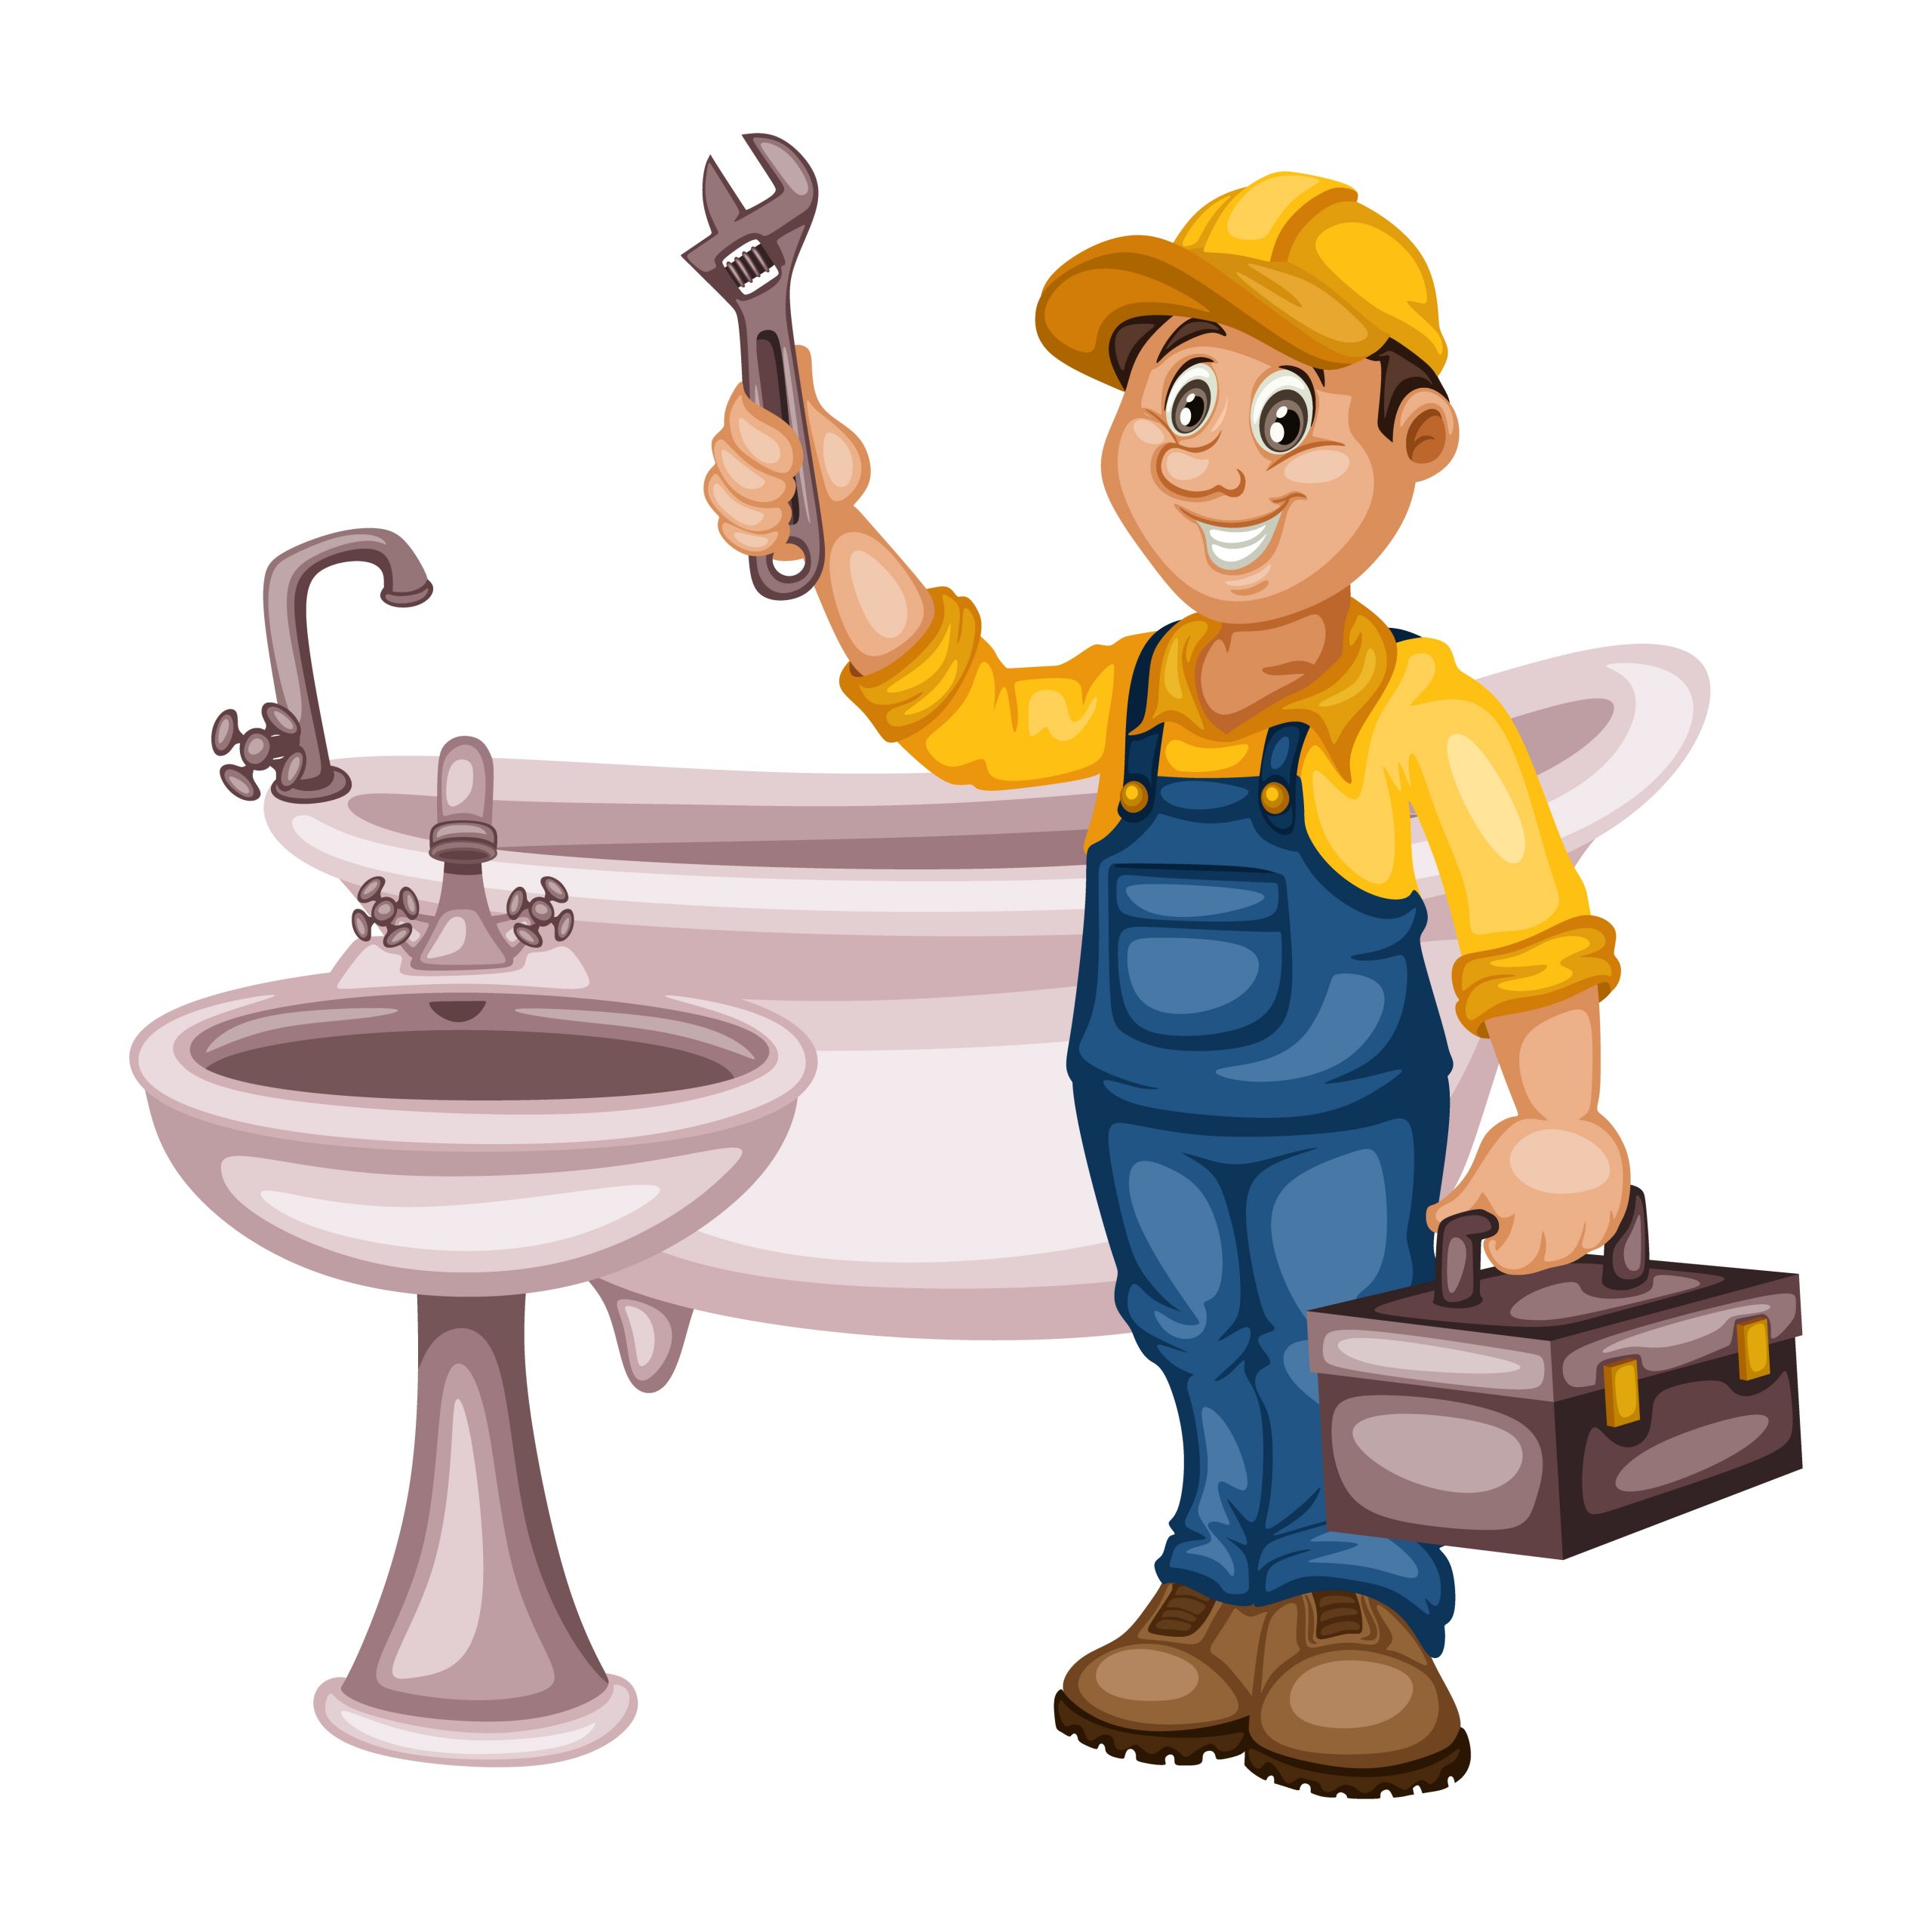 A plumbing specialist cartoon vector with a toolbox, repairing a bathtub and lavatory. Representing an emergency plumber Sydney.